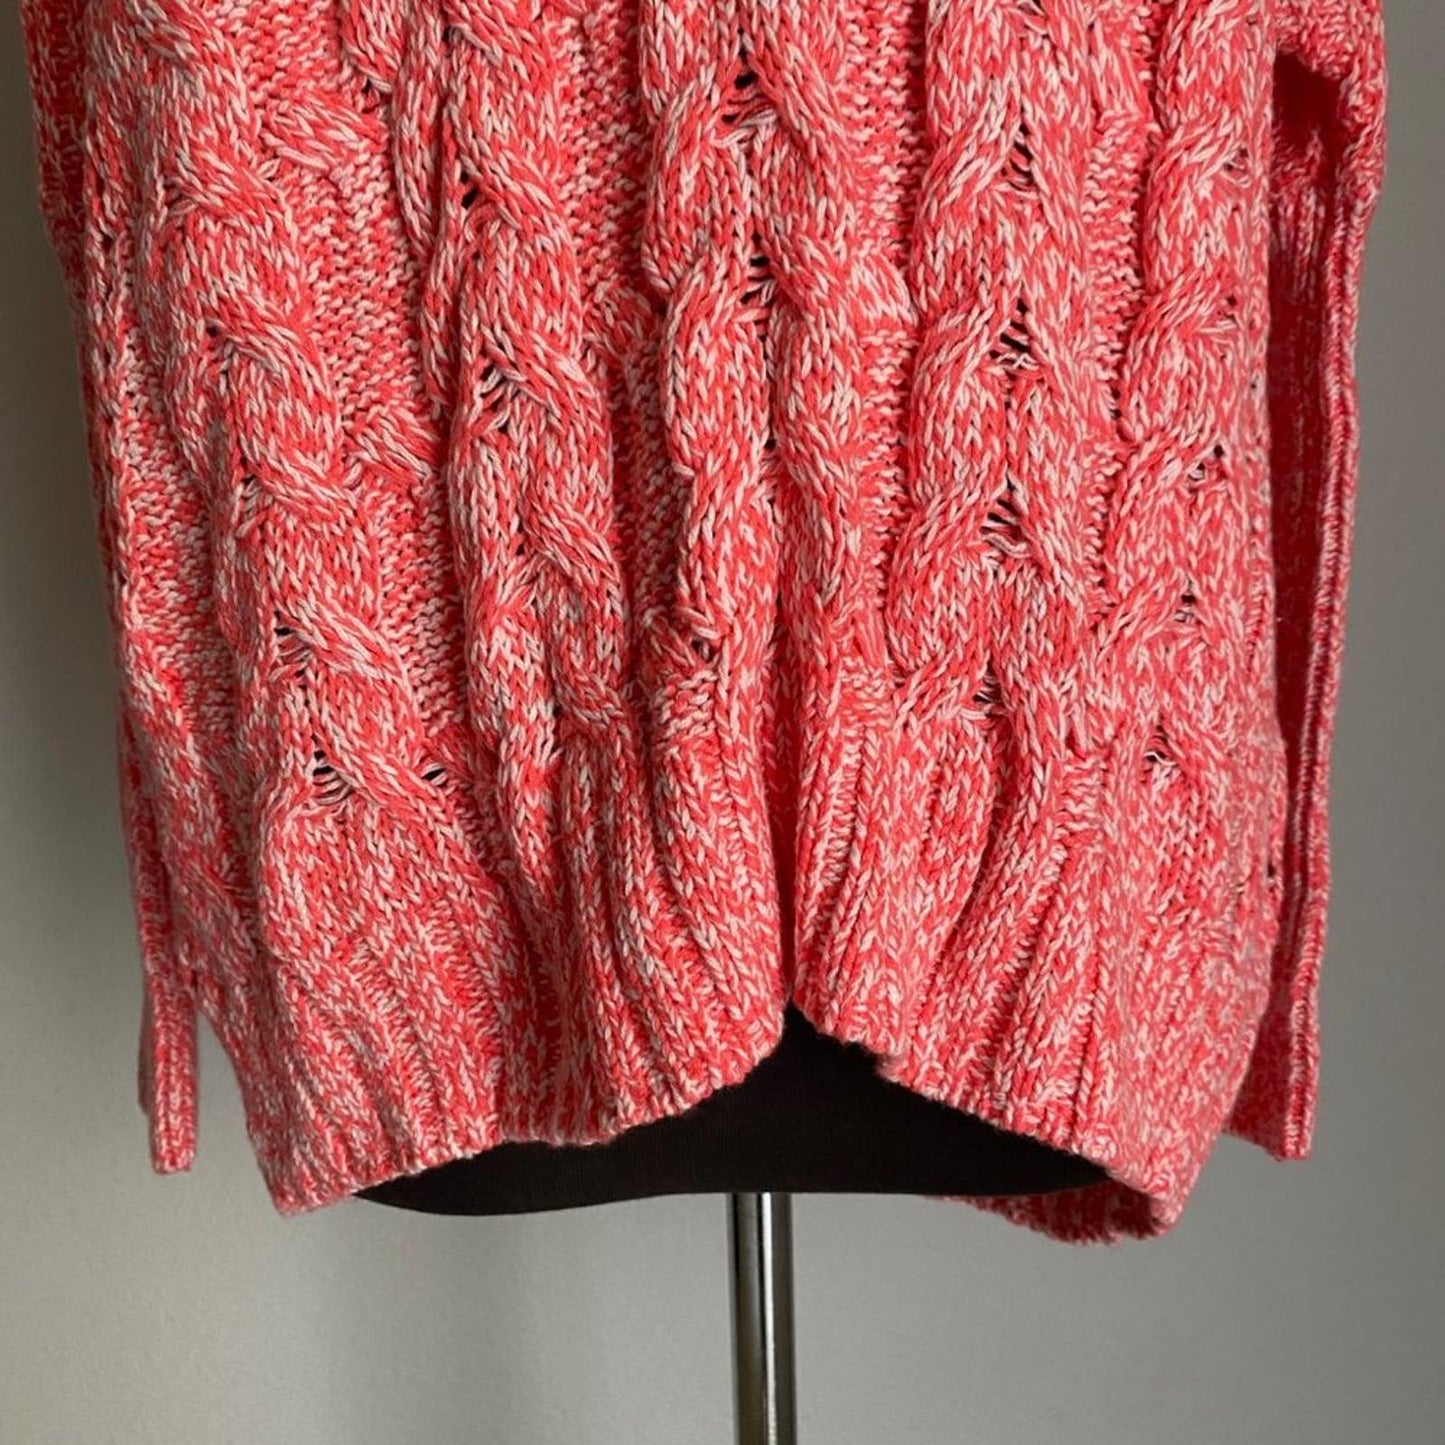 Express sz XS cotton cable knit winter sweater NWOT